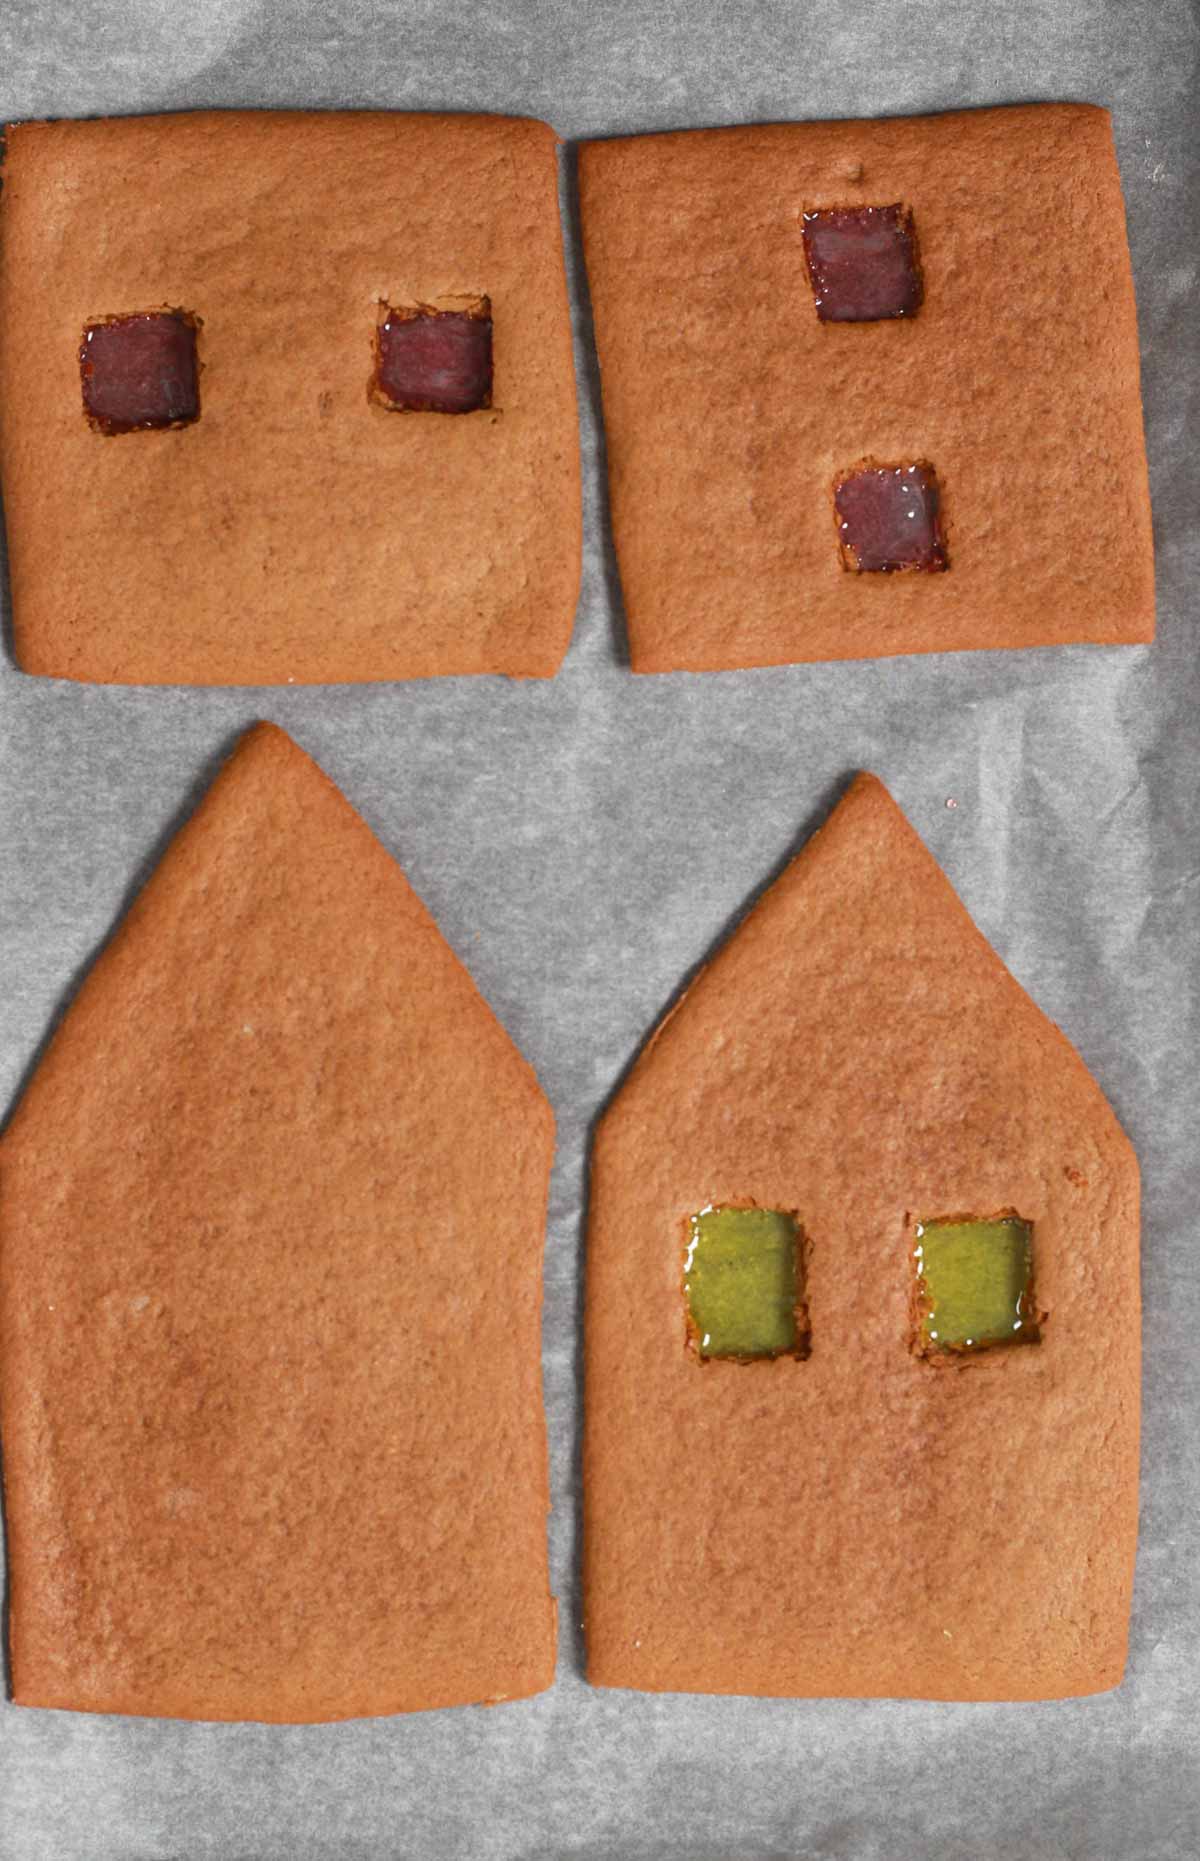 Boiled Sweets In Gingerbread Windows After Baking